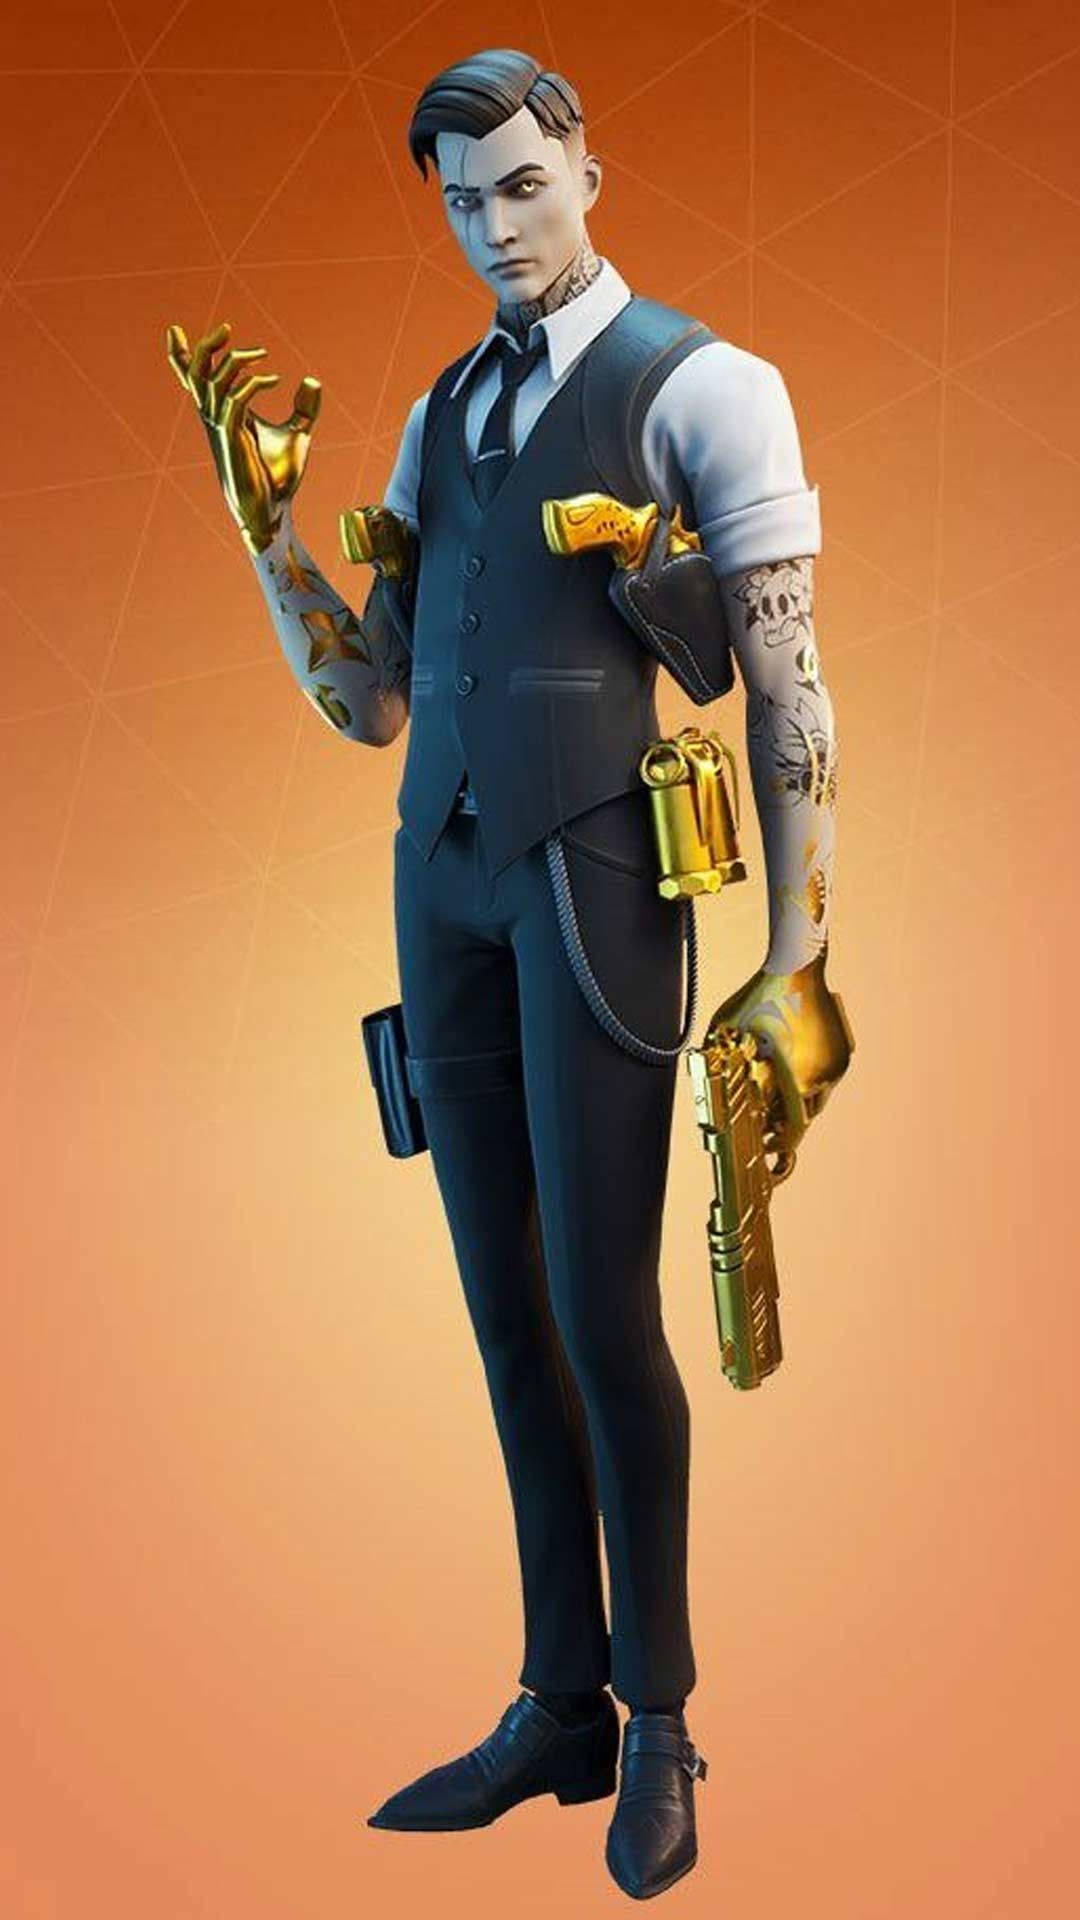 Fortnite - A Man In A Suit And Tie Holding A Gun Wallpaper